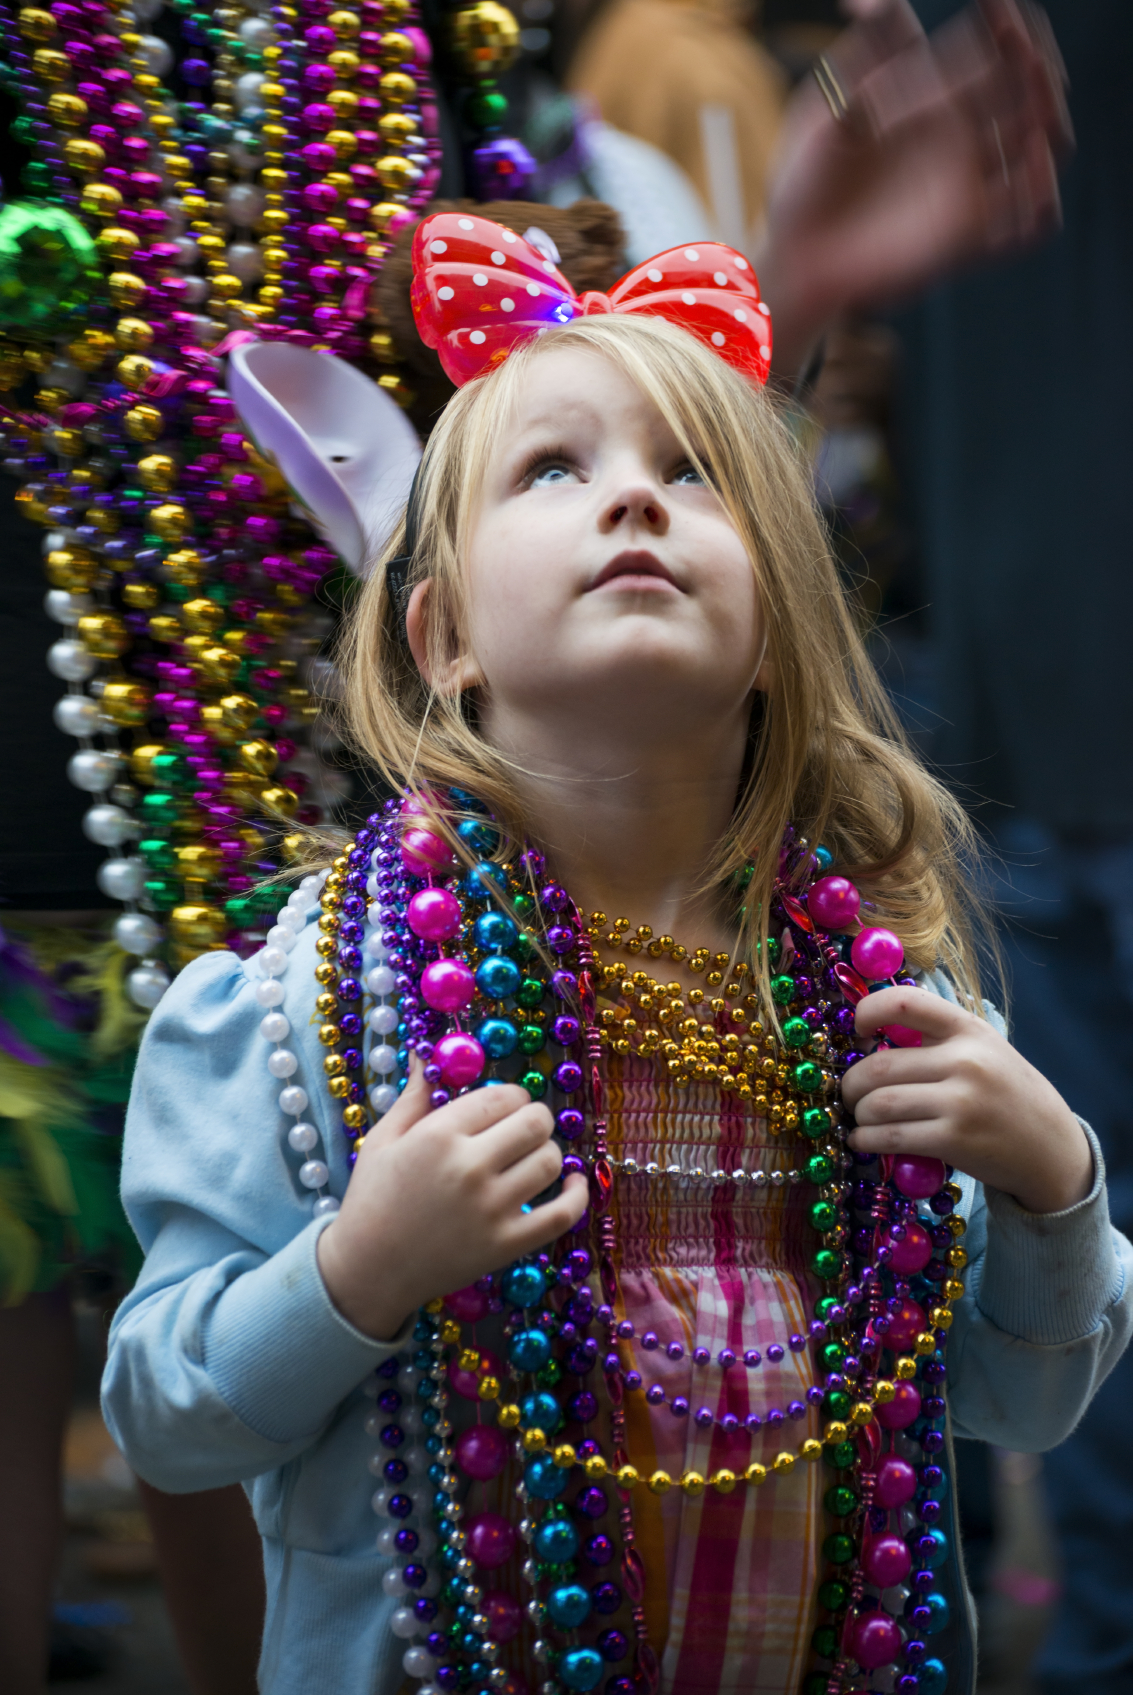 File:Mardi Gras revelers in costume inspired by both Japanese and